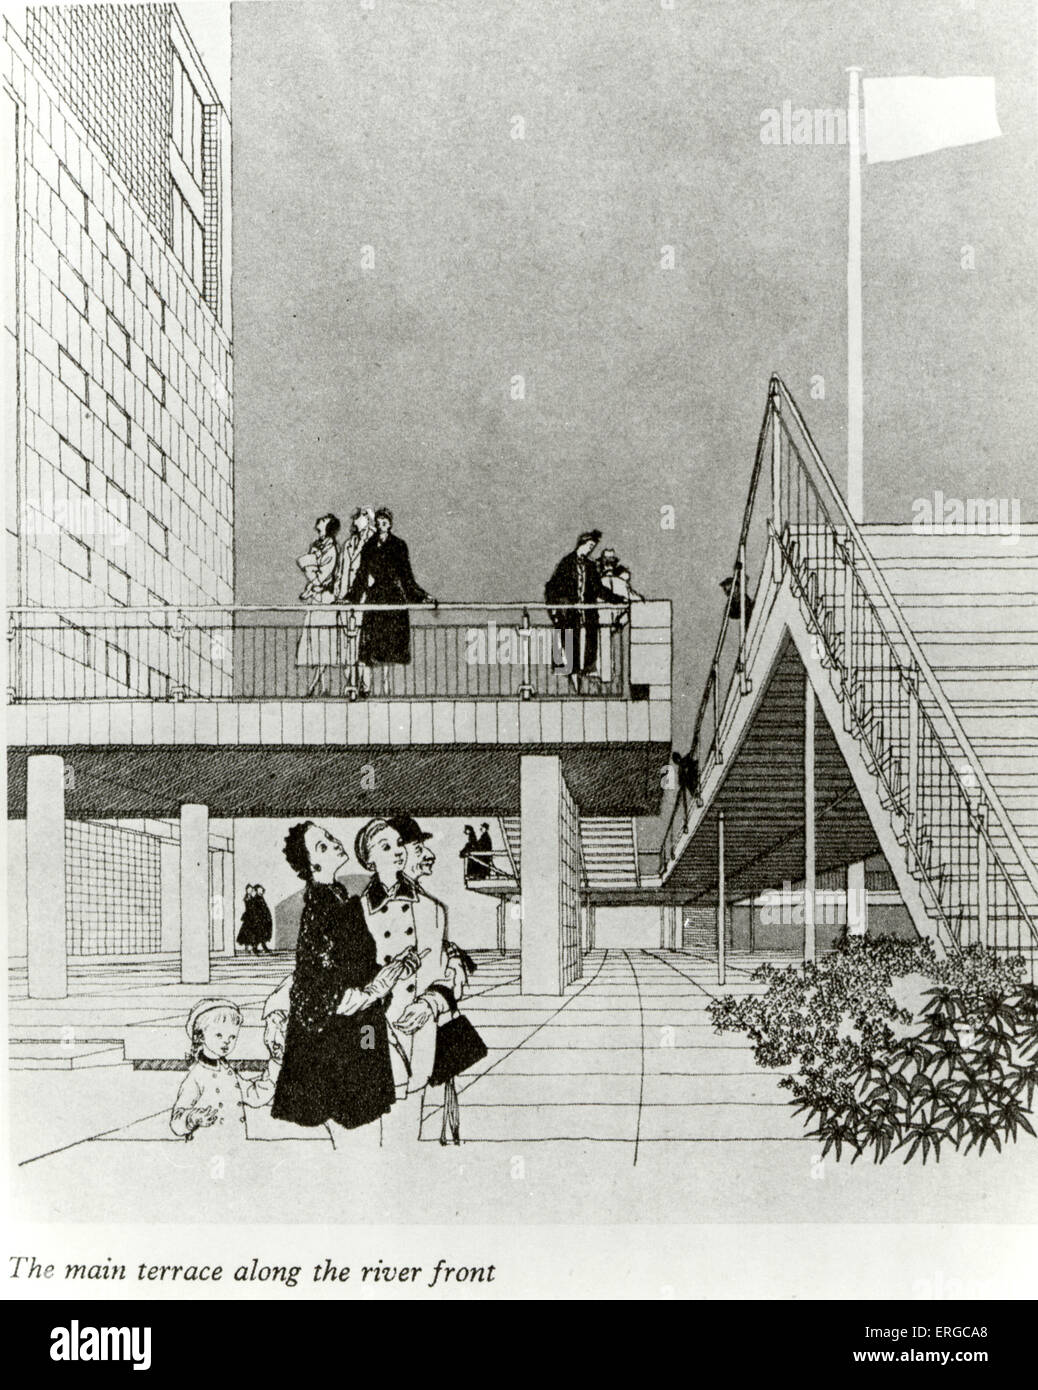 SOUTH BANK design  - c 1950 'The main terrace along the river front' - drawing for London arts centre Stock Photo